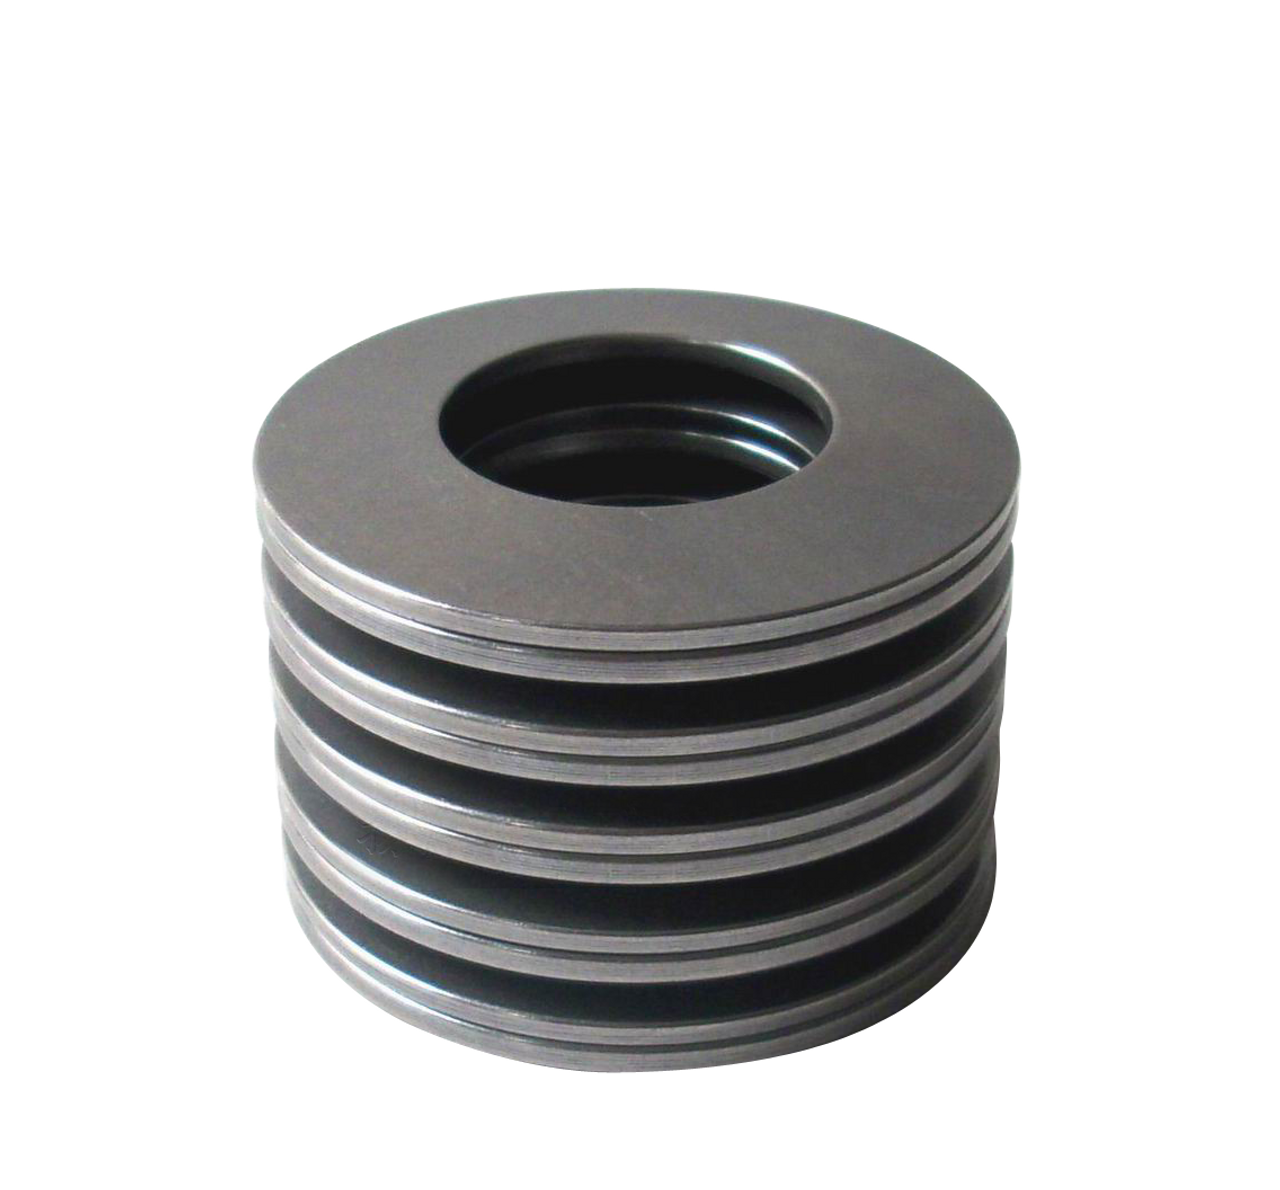 8mm Disc Spring (DIN 2093) Conical Washer  DS008.2-018-08